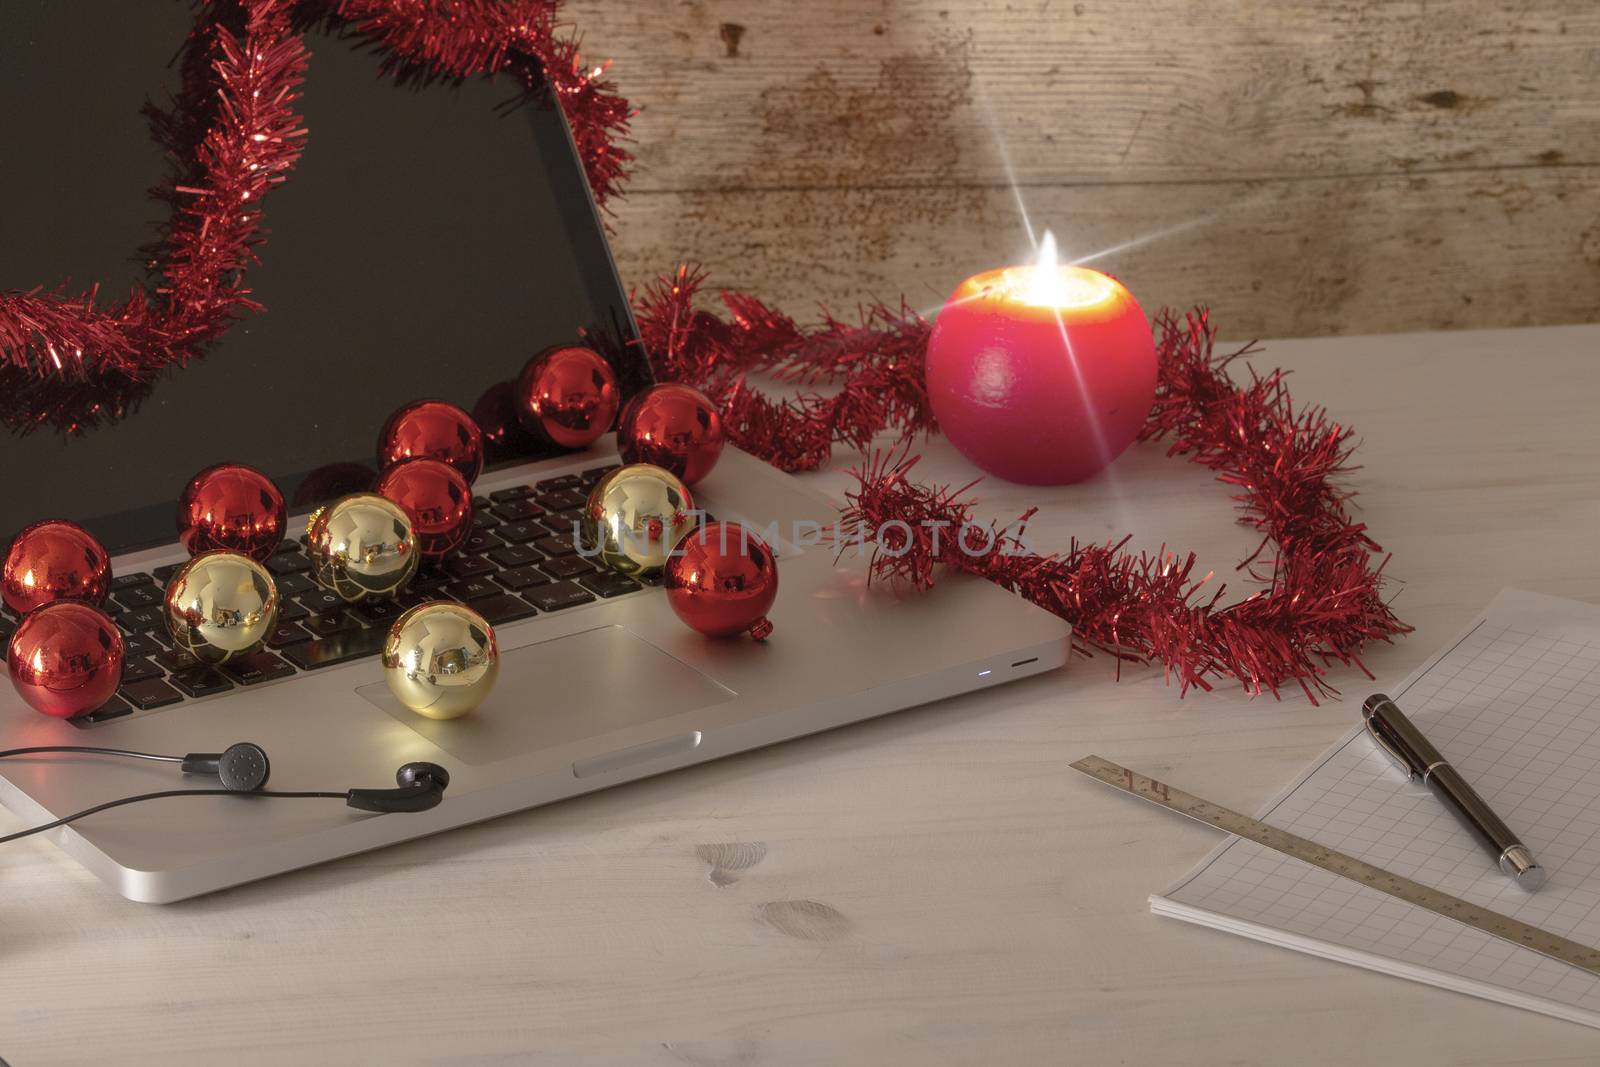 Computer job at Christmas holidays concept: an aluminum laptop open, red wreath decoration, red and gold baubles, lit candle, pen and ruler on block notes on light wooden table